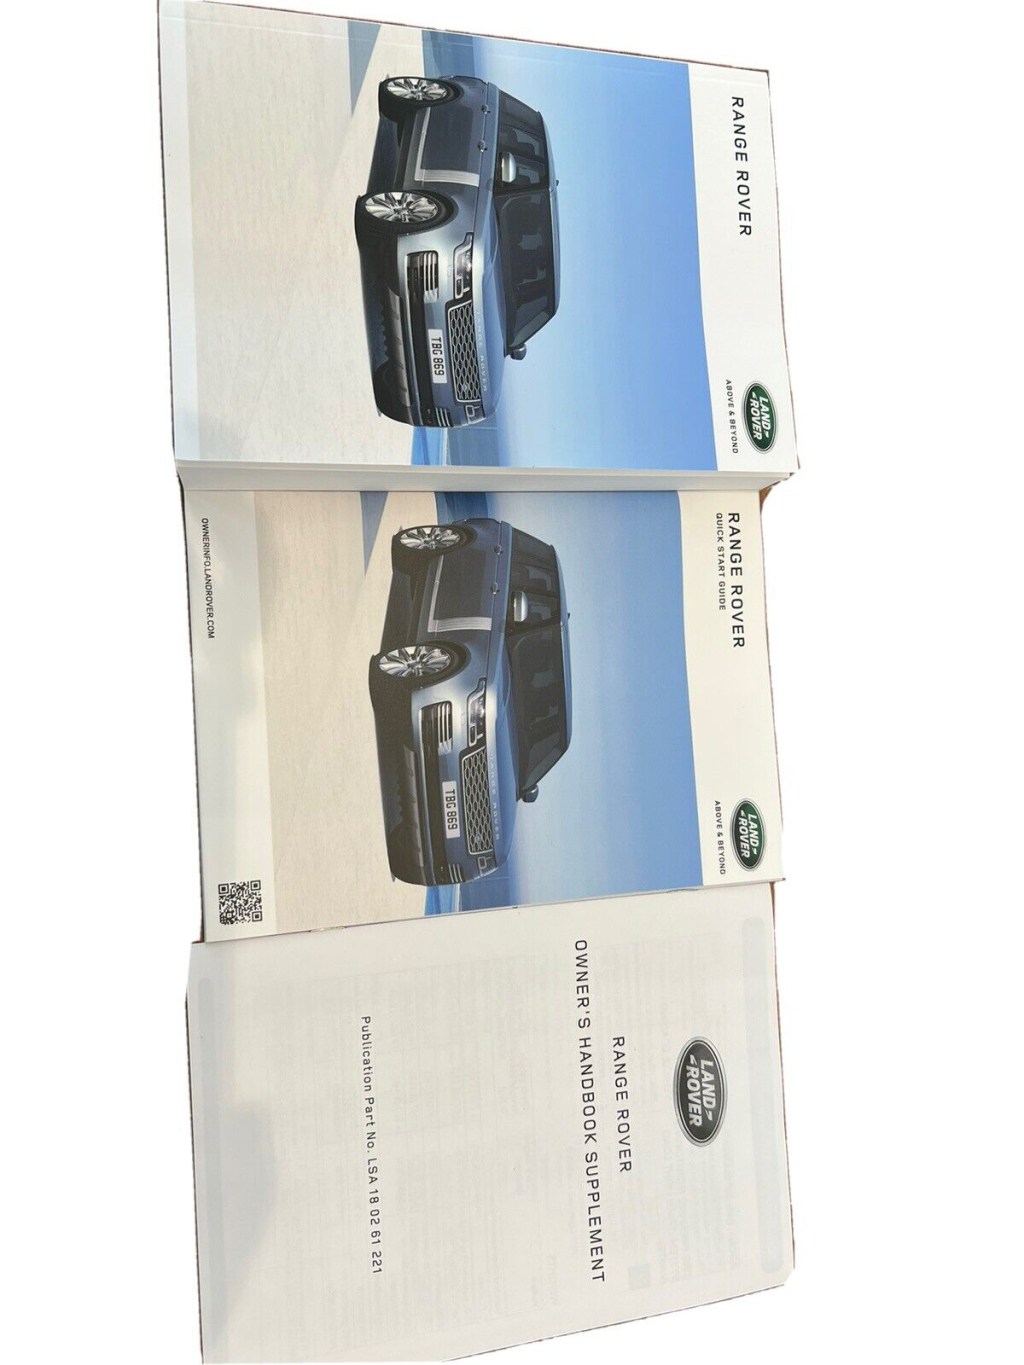 Picture of: Land Rover Range Rover owners manuals –